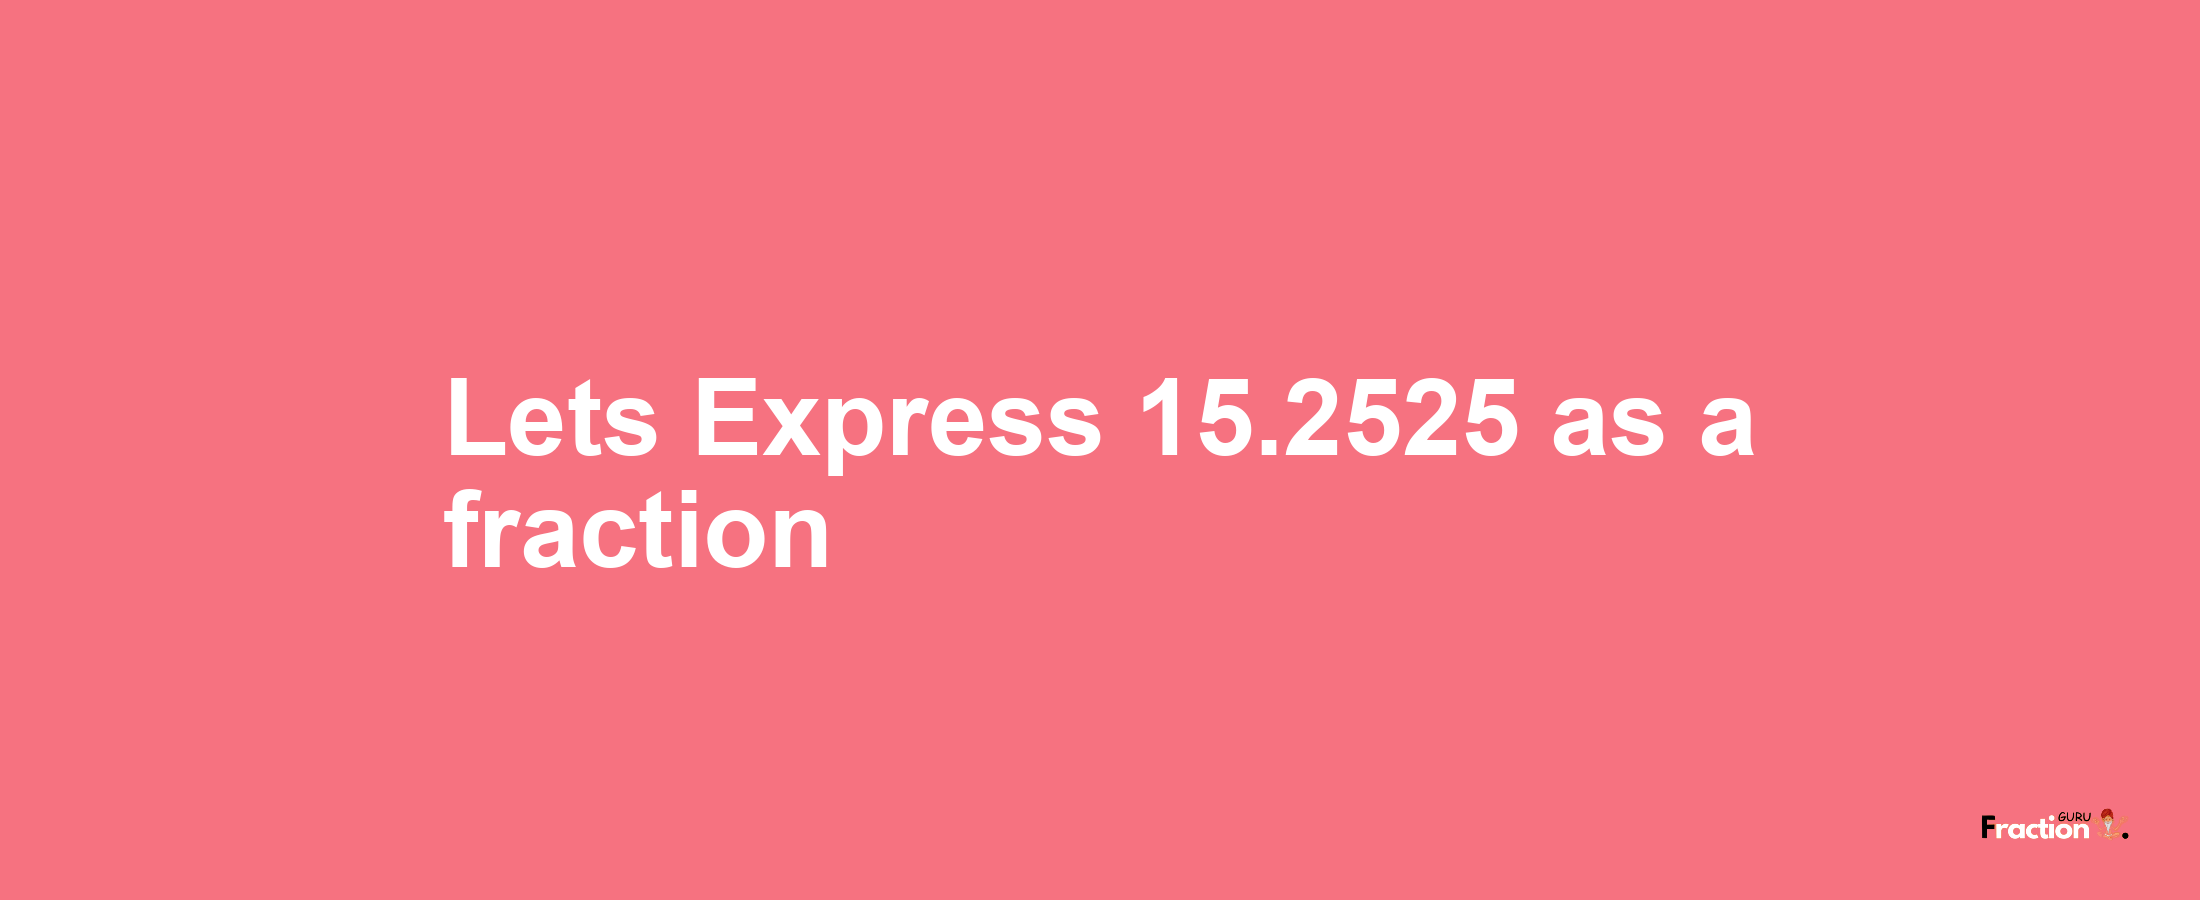 Lets Express 15.2525 as afraction